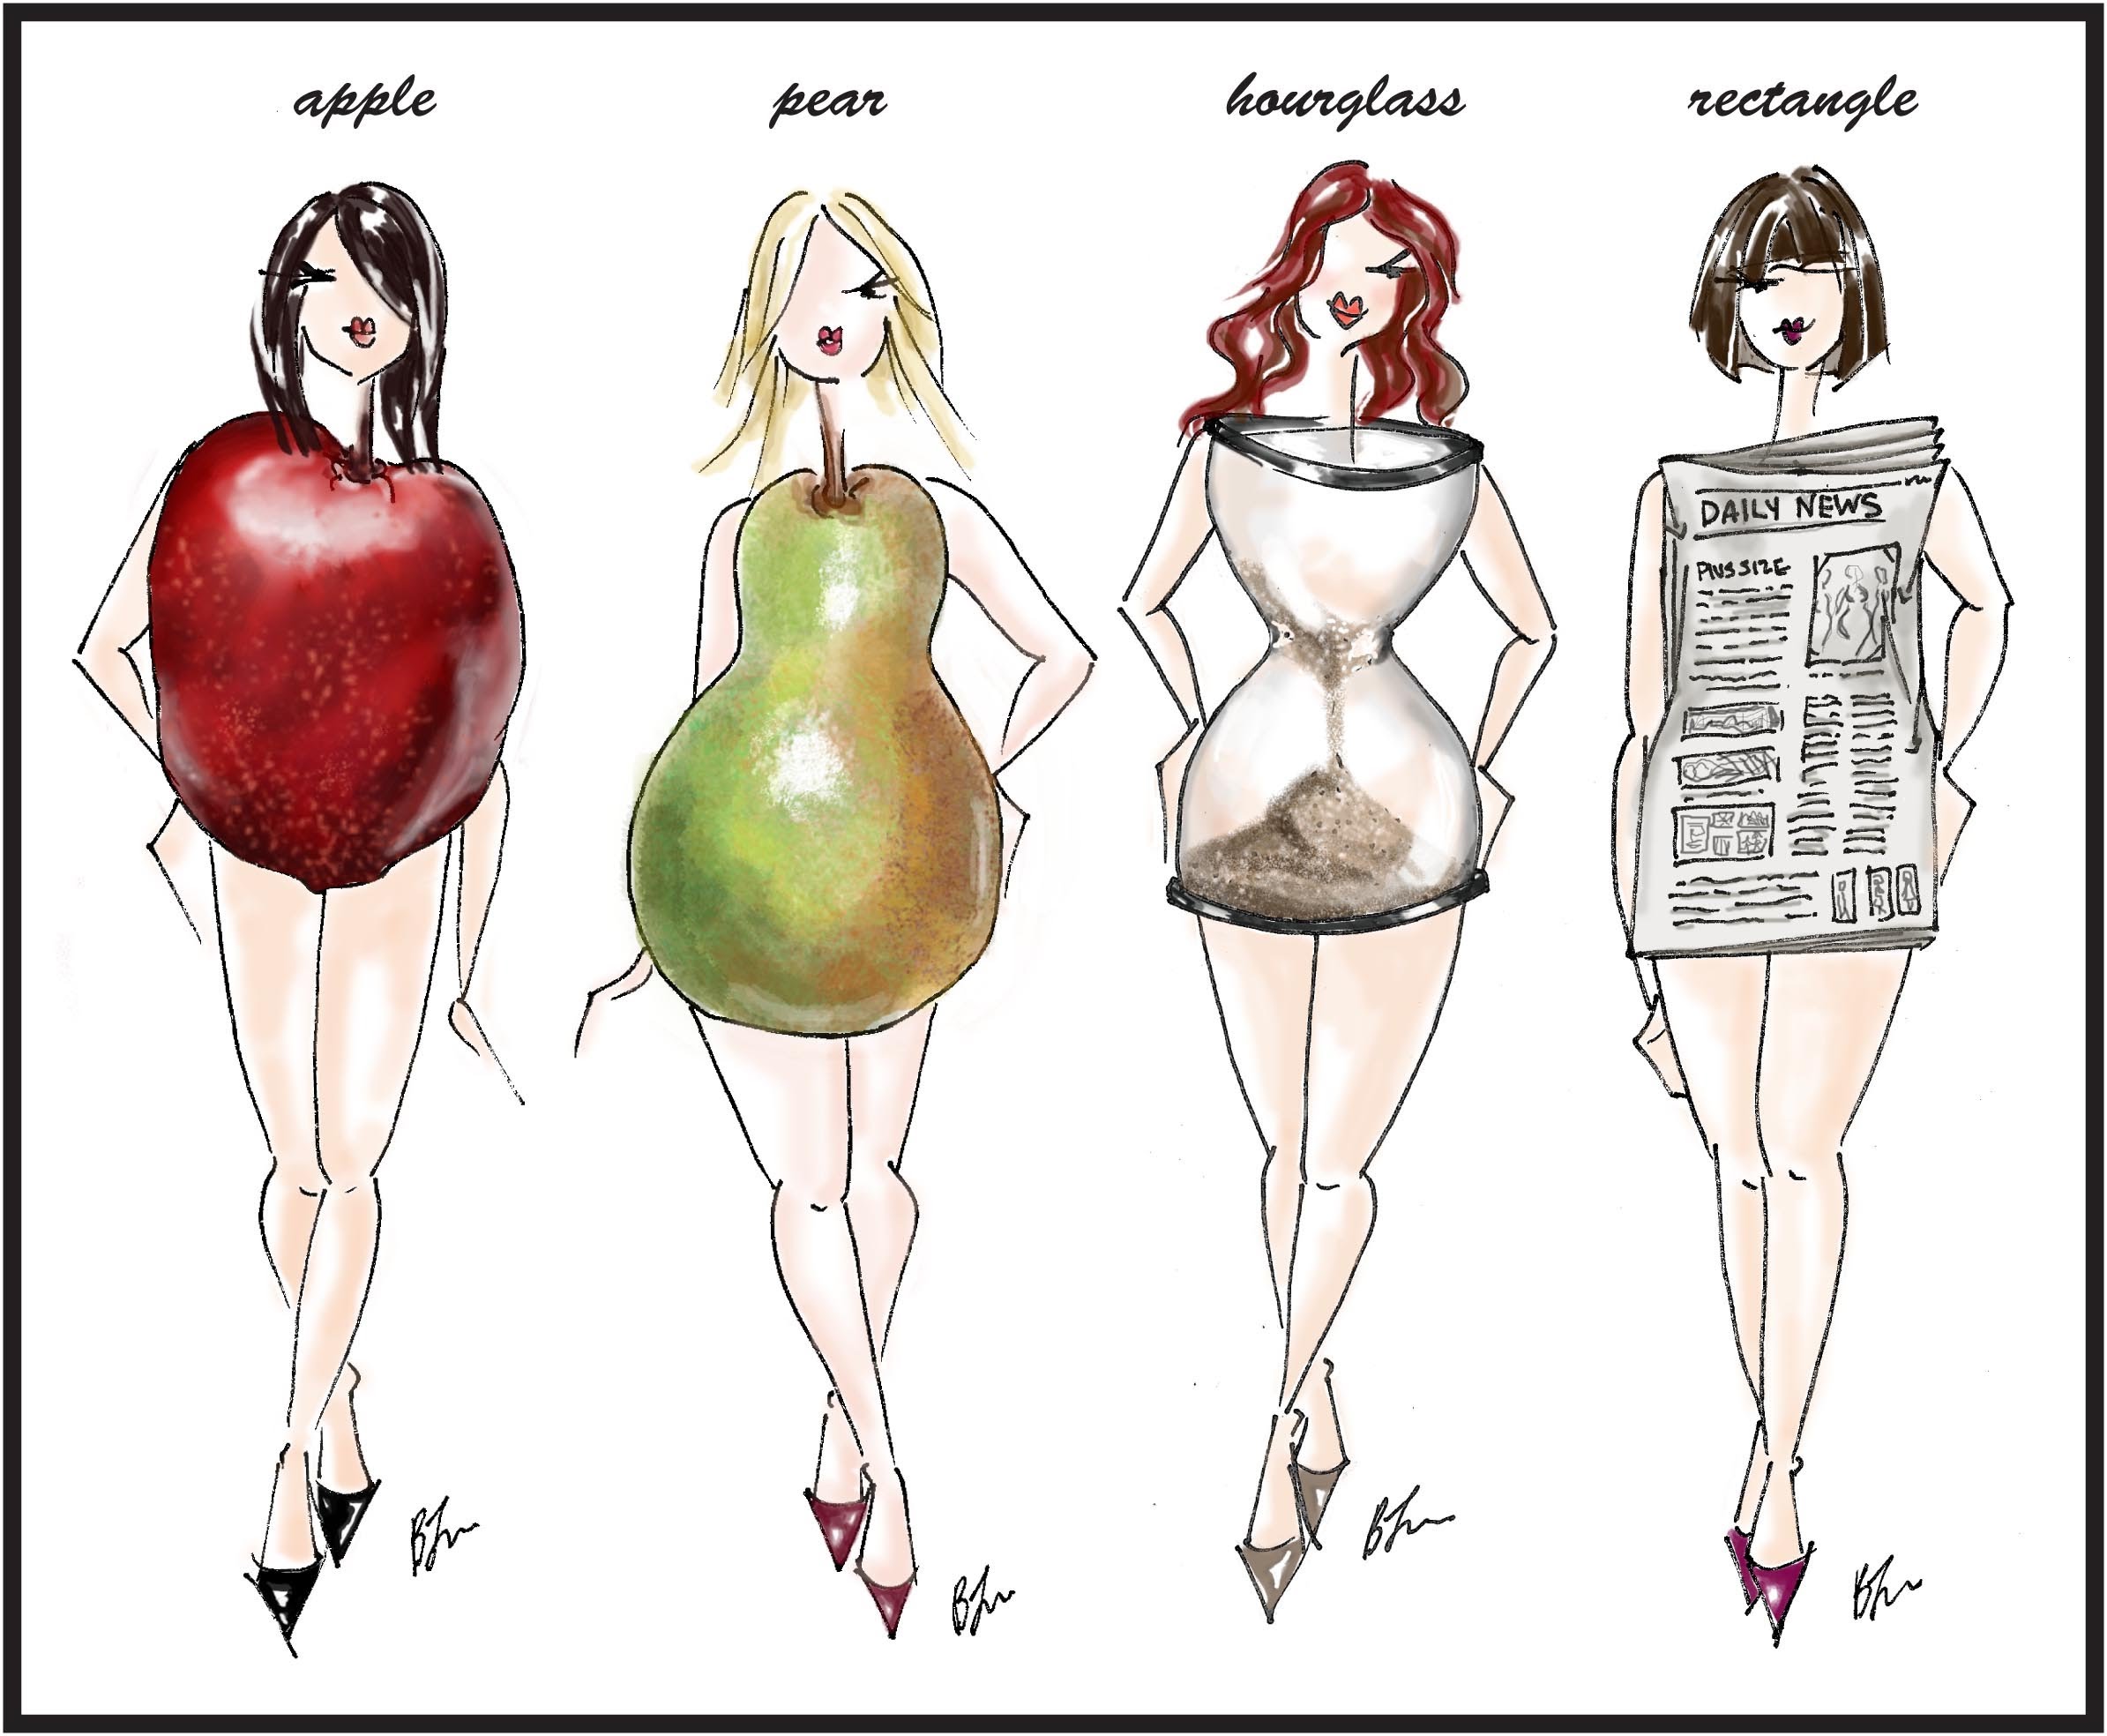 Dressing Your Body Type: Pear